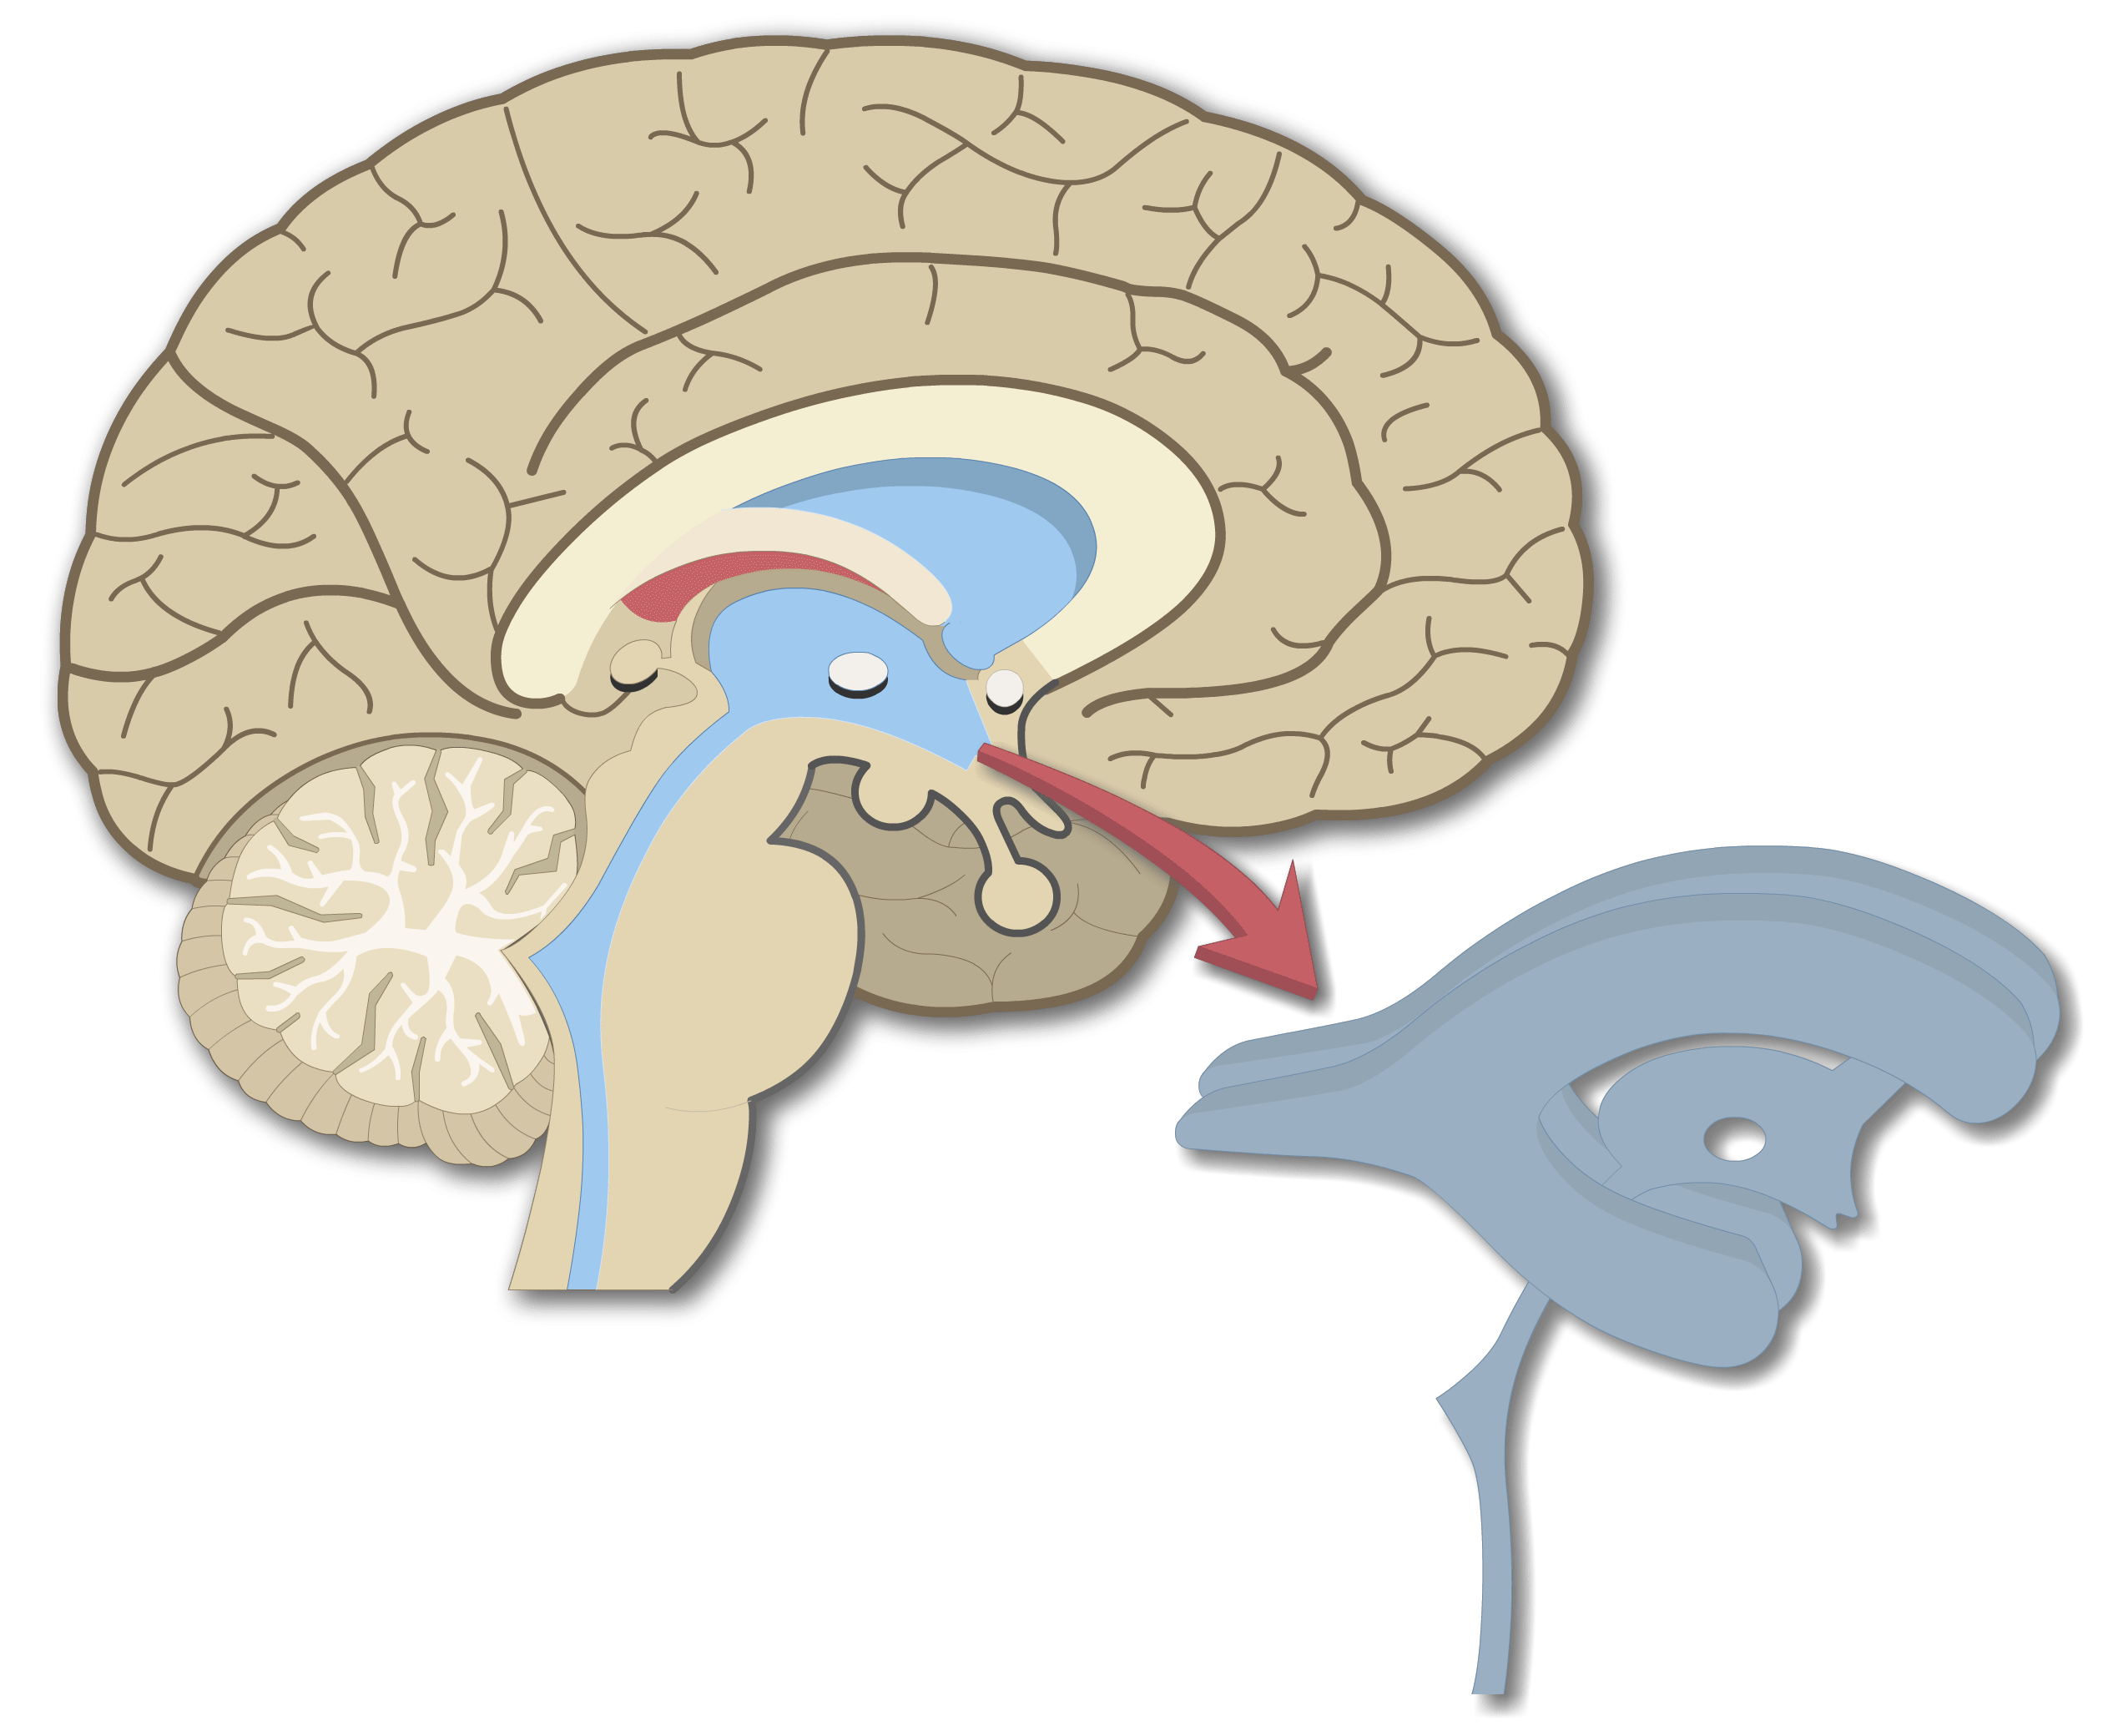 An image showing the Cerebrospinal fluid flow pathway, from the ventricles of the brain down to the cerebral canal